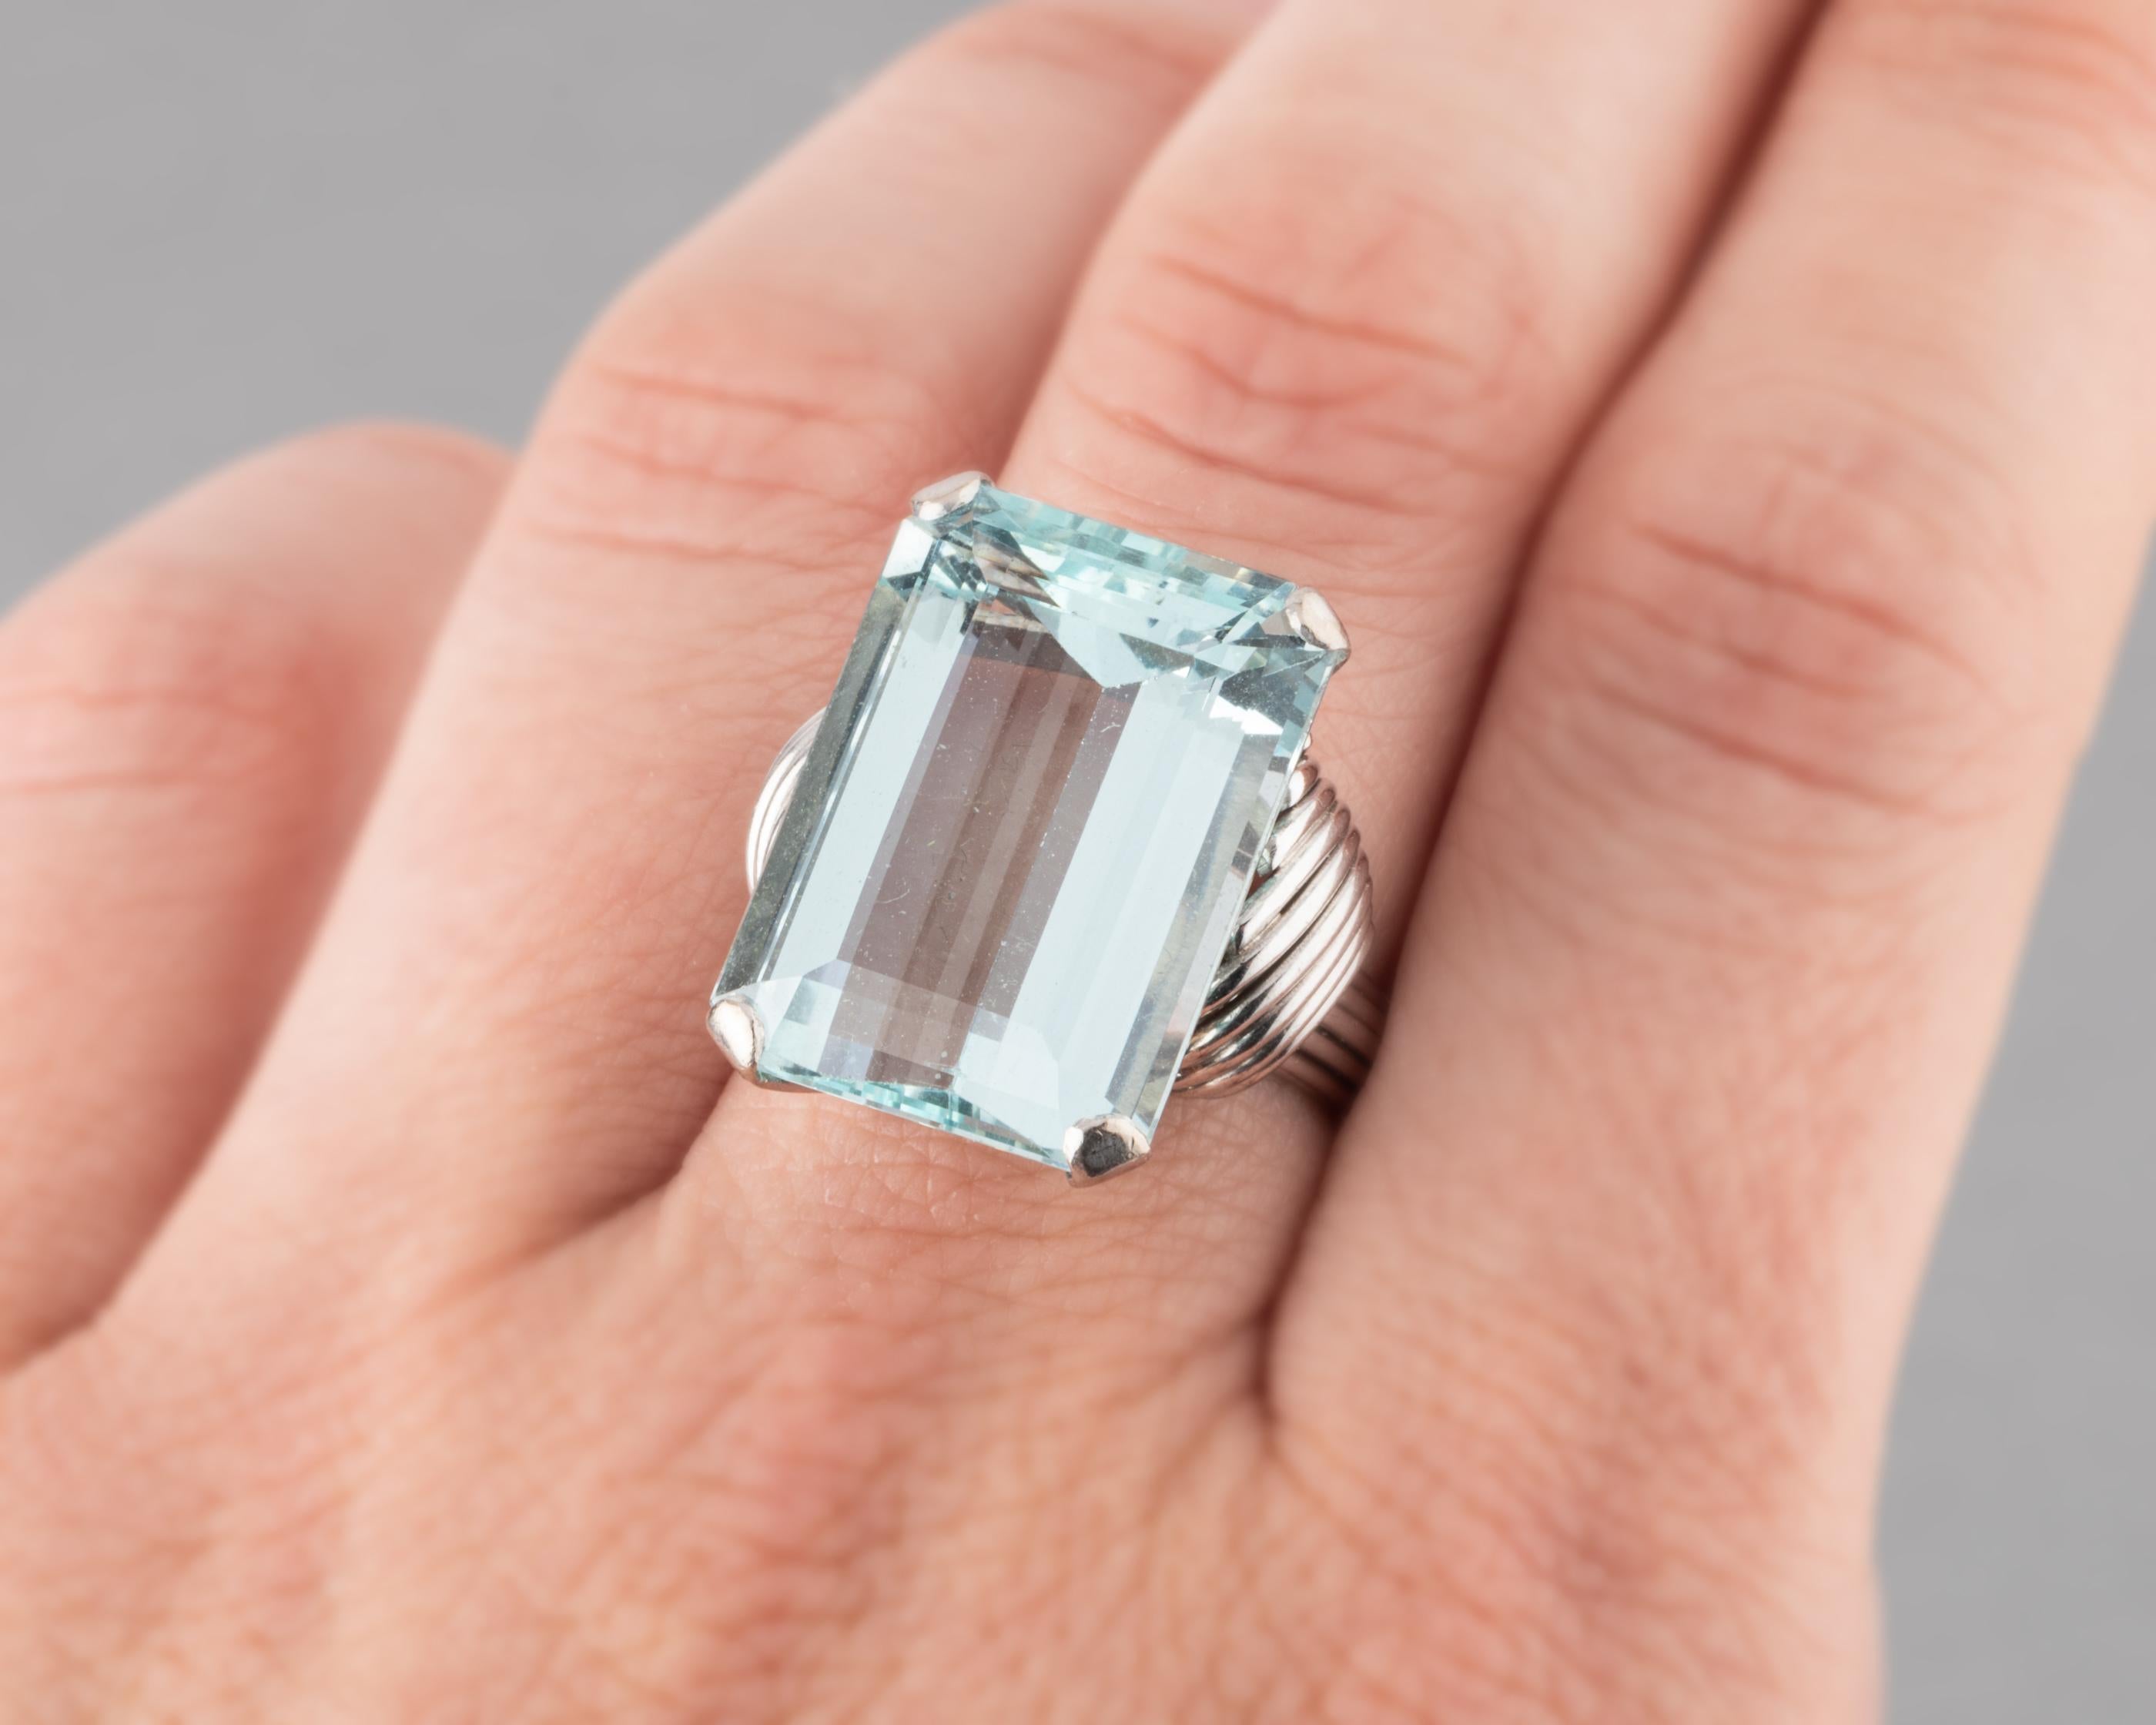 Very lovely vintage ring, made circa 1950/1960.
Made in white gold 18k and set with a big aquamarine of 25 carats estimate.
Dimension of aquamarine: 21*15 mm and 9mm depth
Finger size is 6.5 USA of 55 Europe
Total weight: 12.70 grams